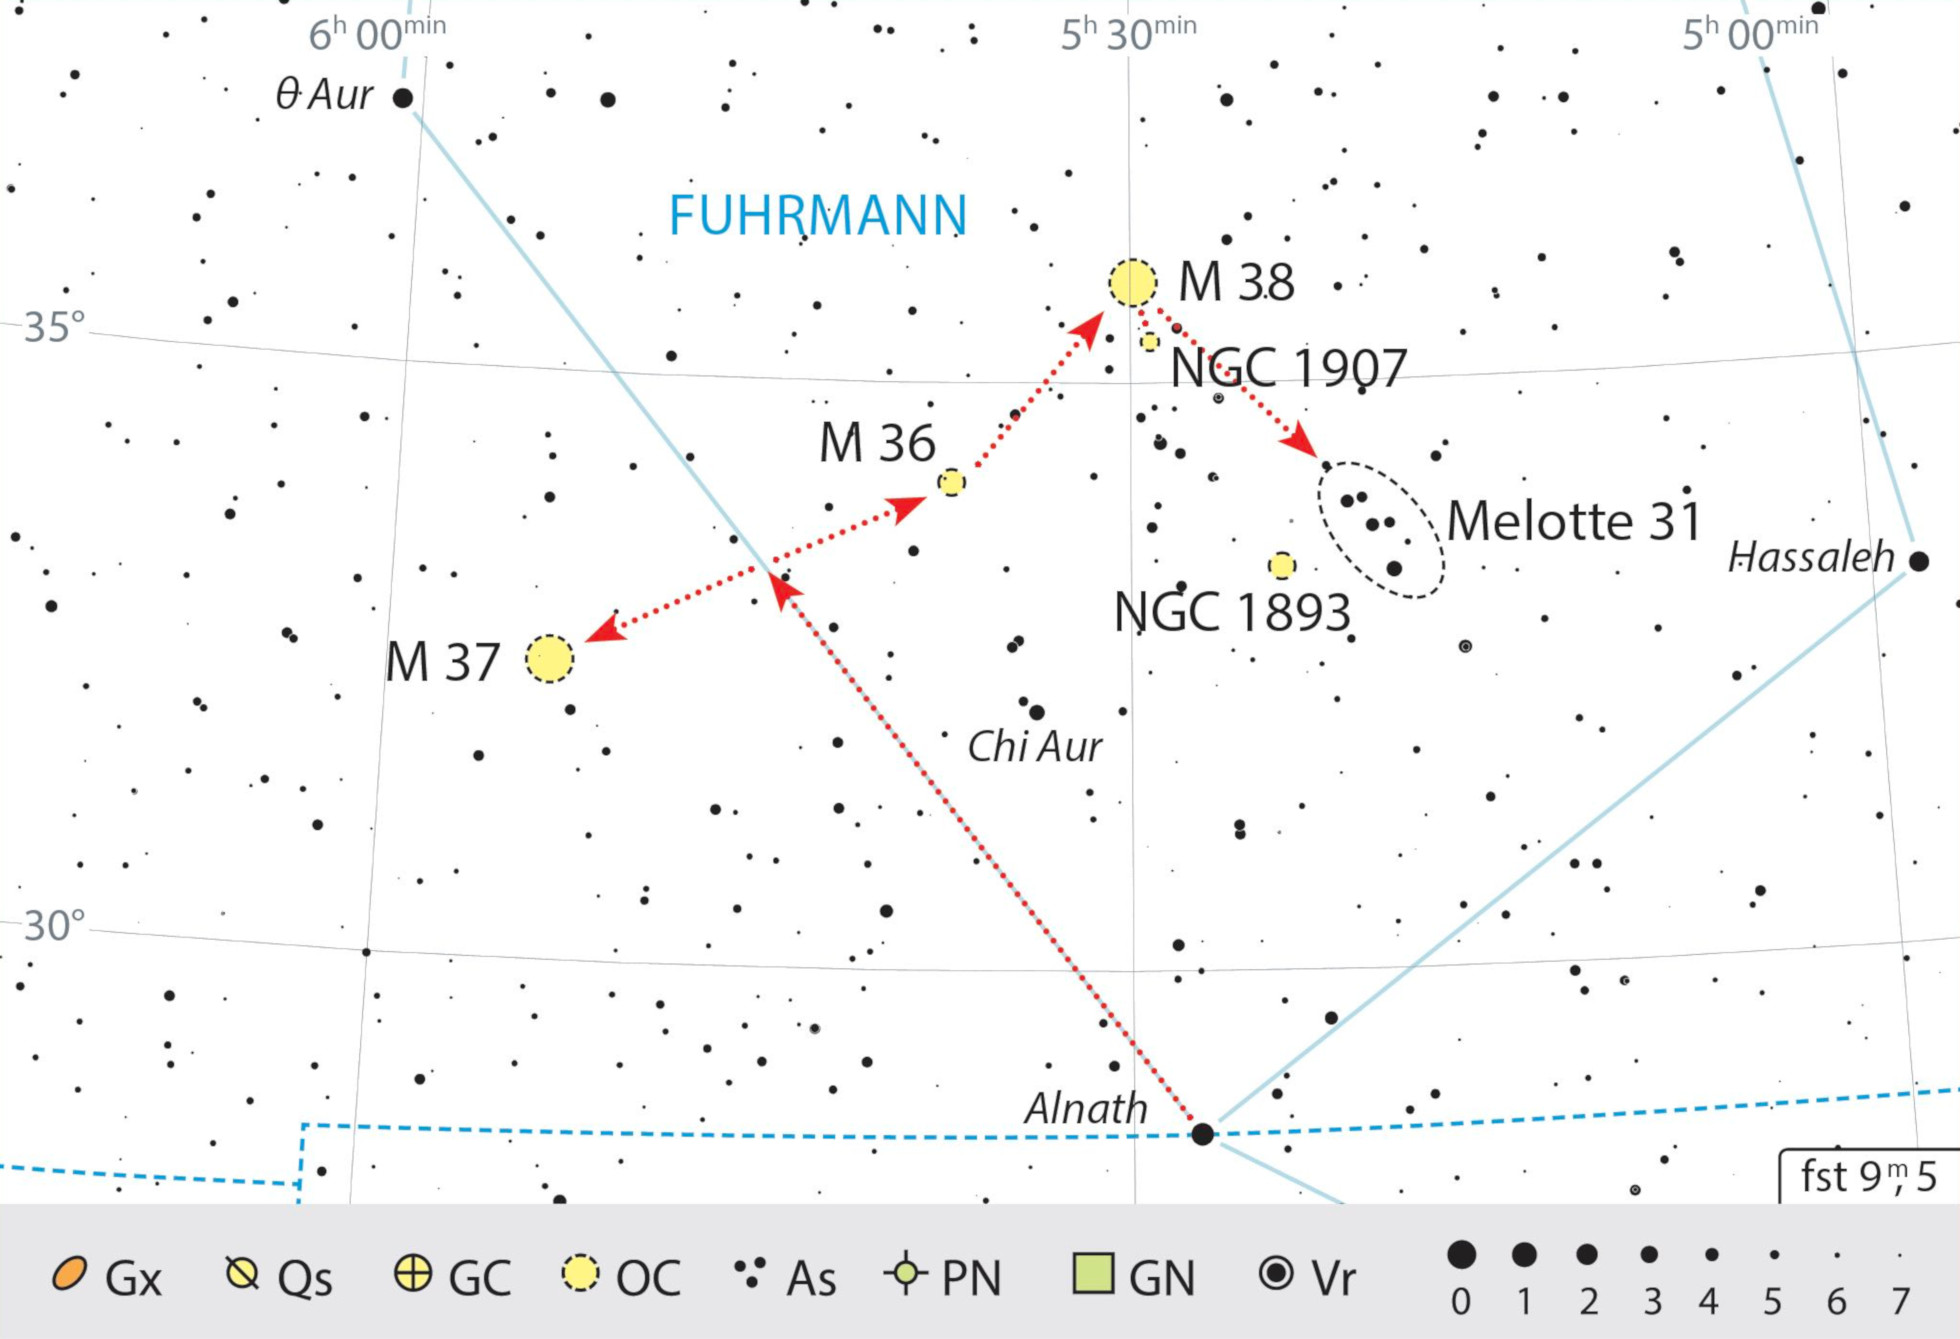 There are some interesting star clusters close together in the south of the constellation of Auriga, which can also be explored with binoculars. J. Scholten